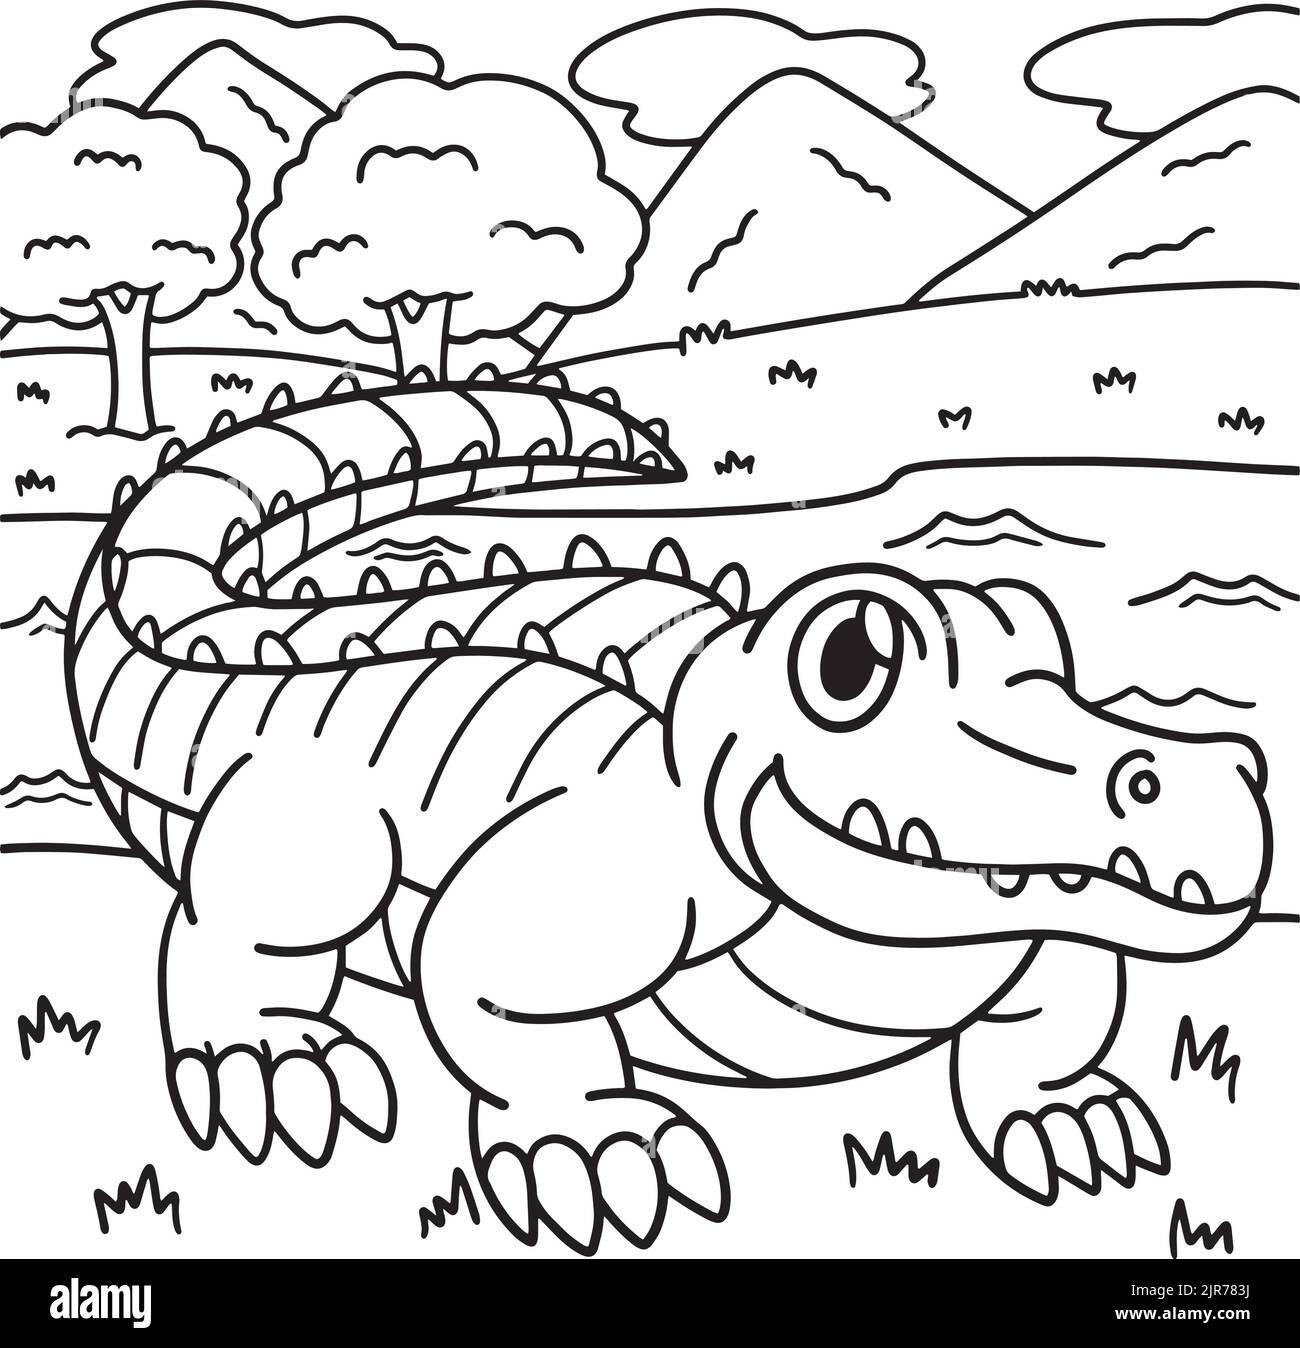 Crocodile Coloring Page for Kids Stock Vector Image & Art - Alamy